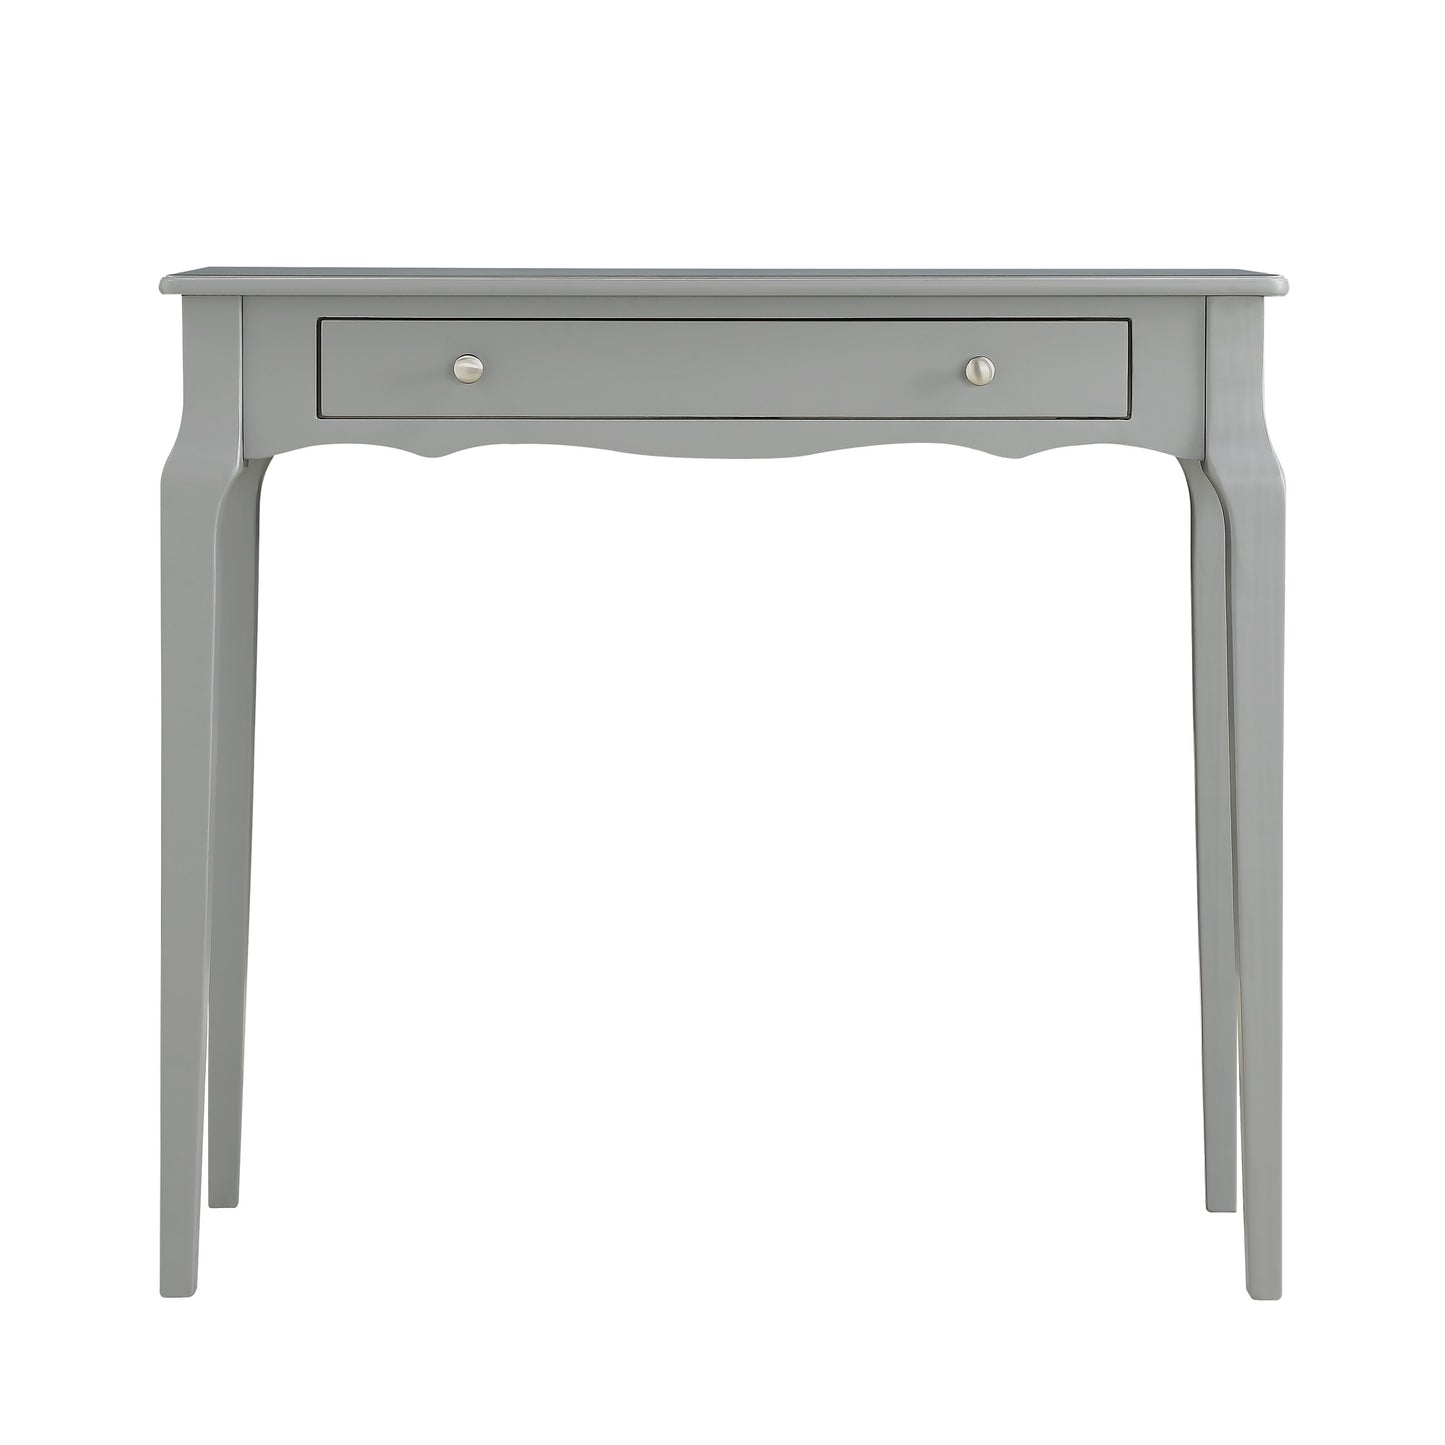 1-Drawer Wood Accent Console Sofa Table - Grey